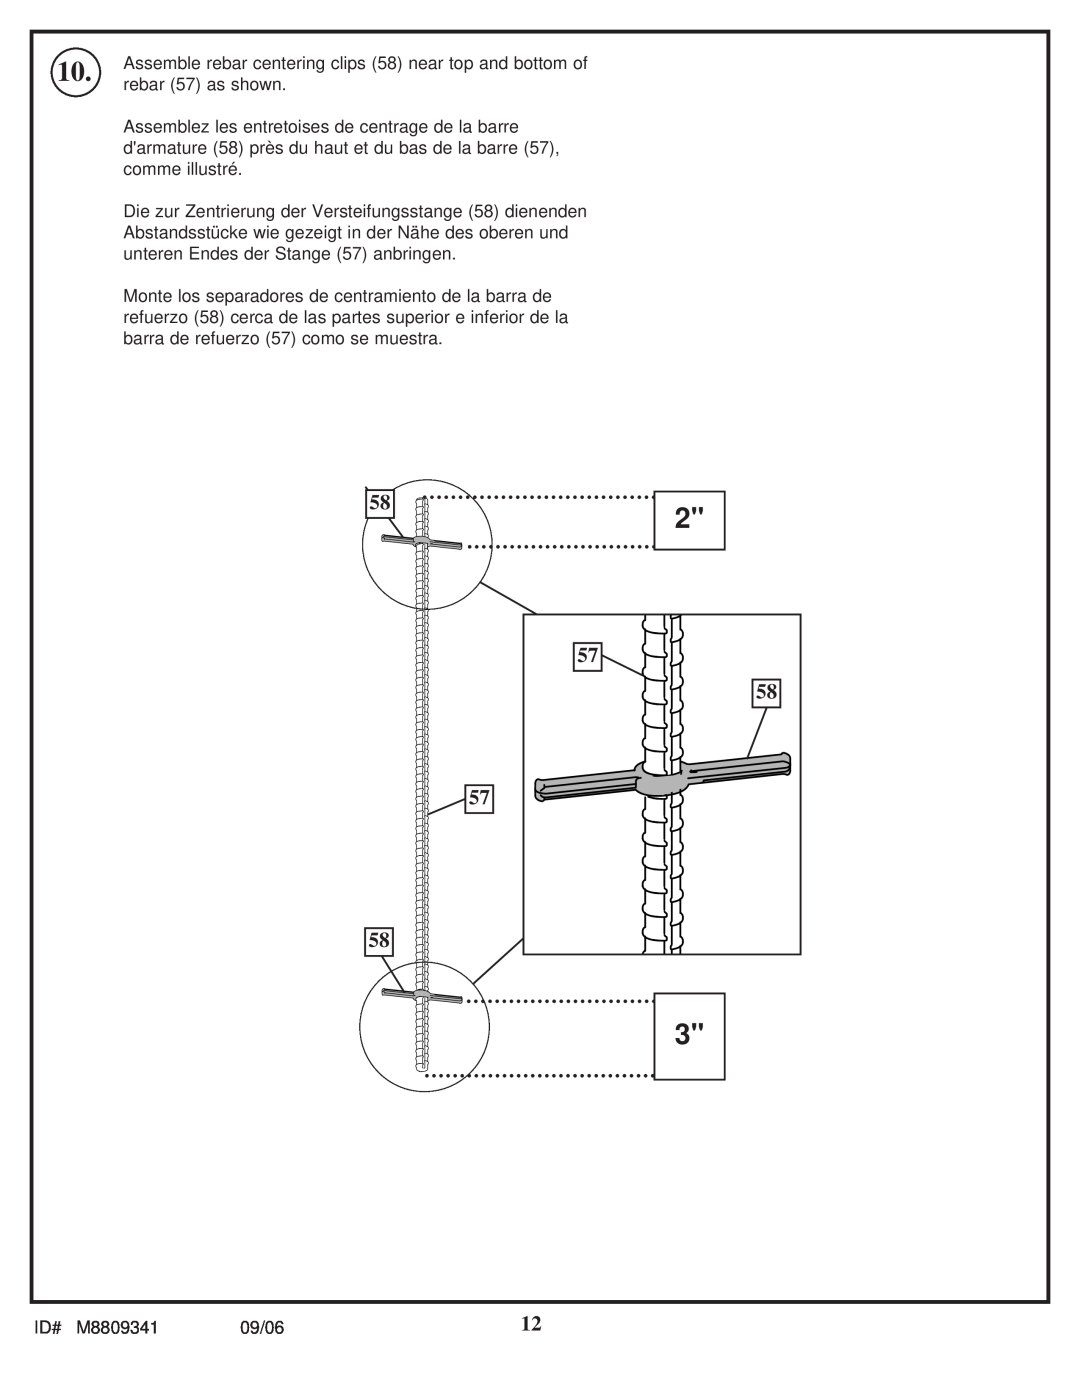 Spalding manual Assemble rebar centering clips 58 near top and bottom of, rebar 57 as shown, ID# M8809341, 09/06 